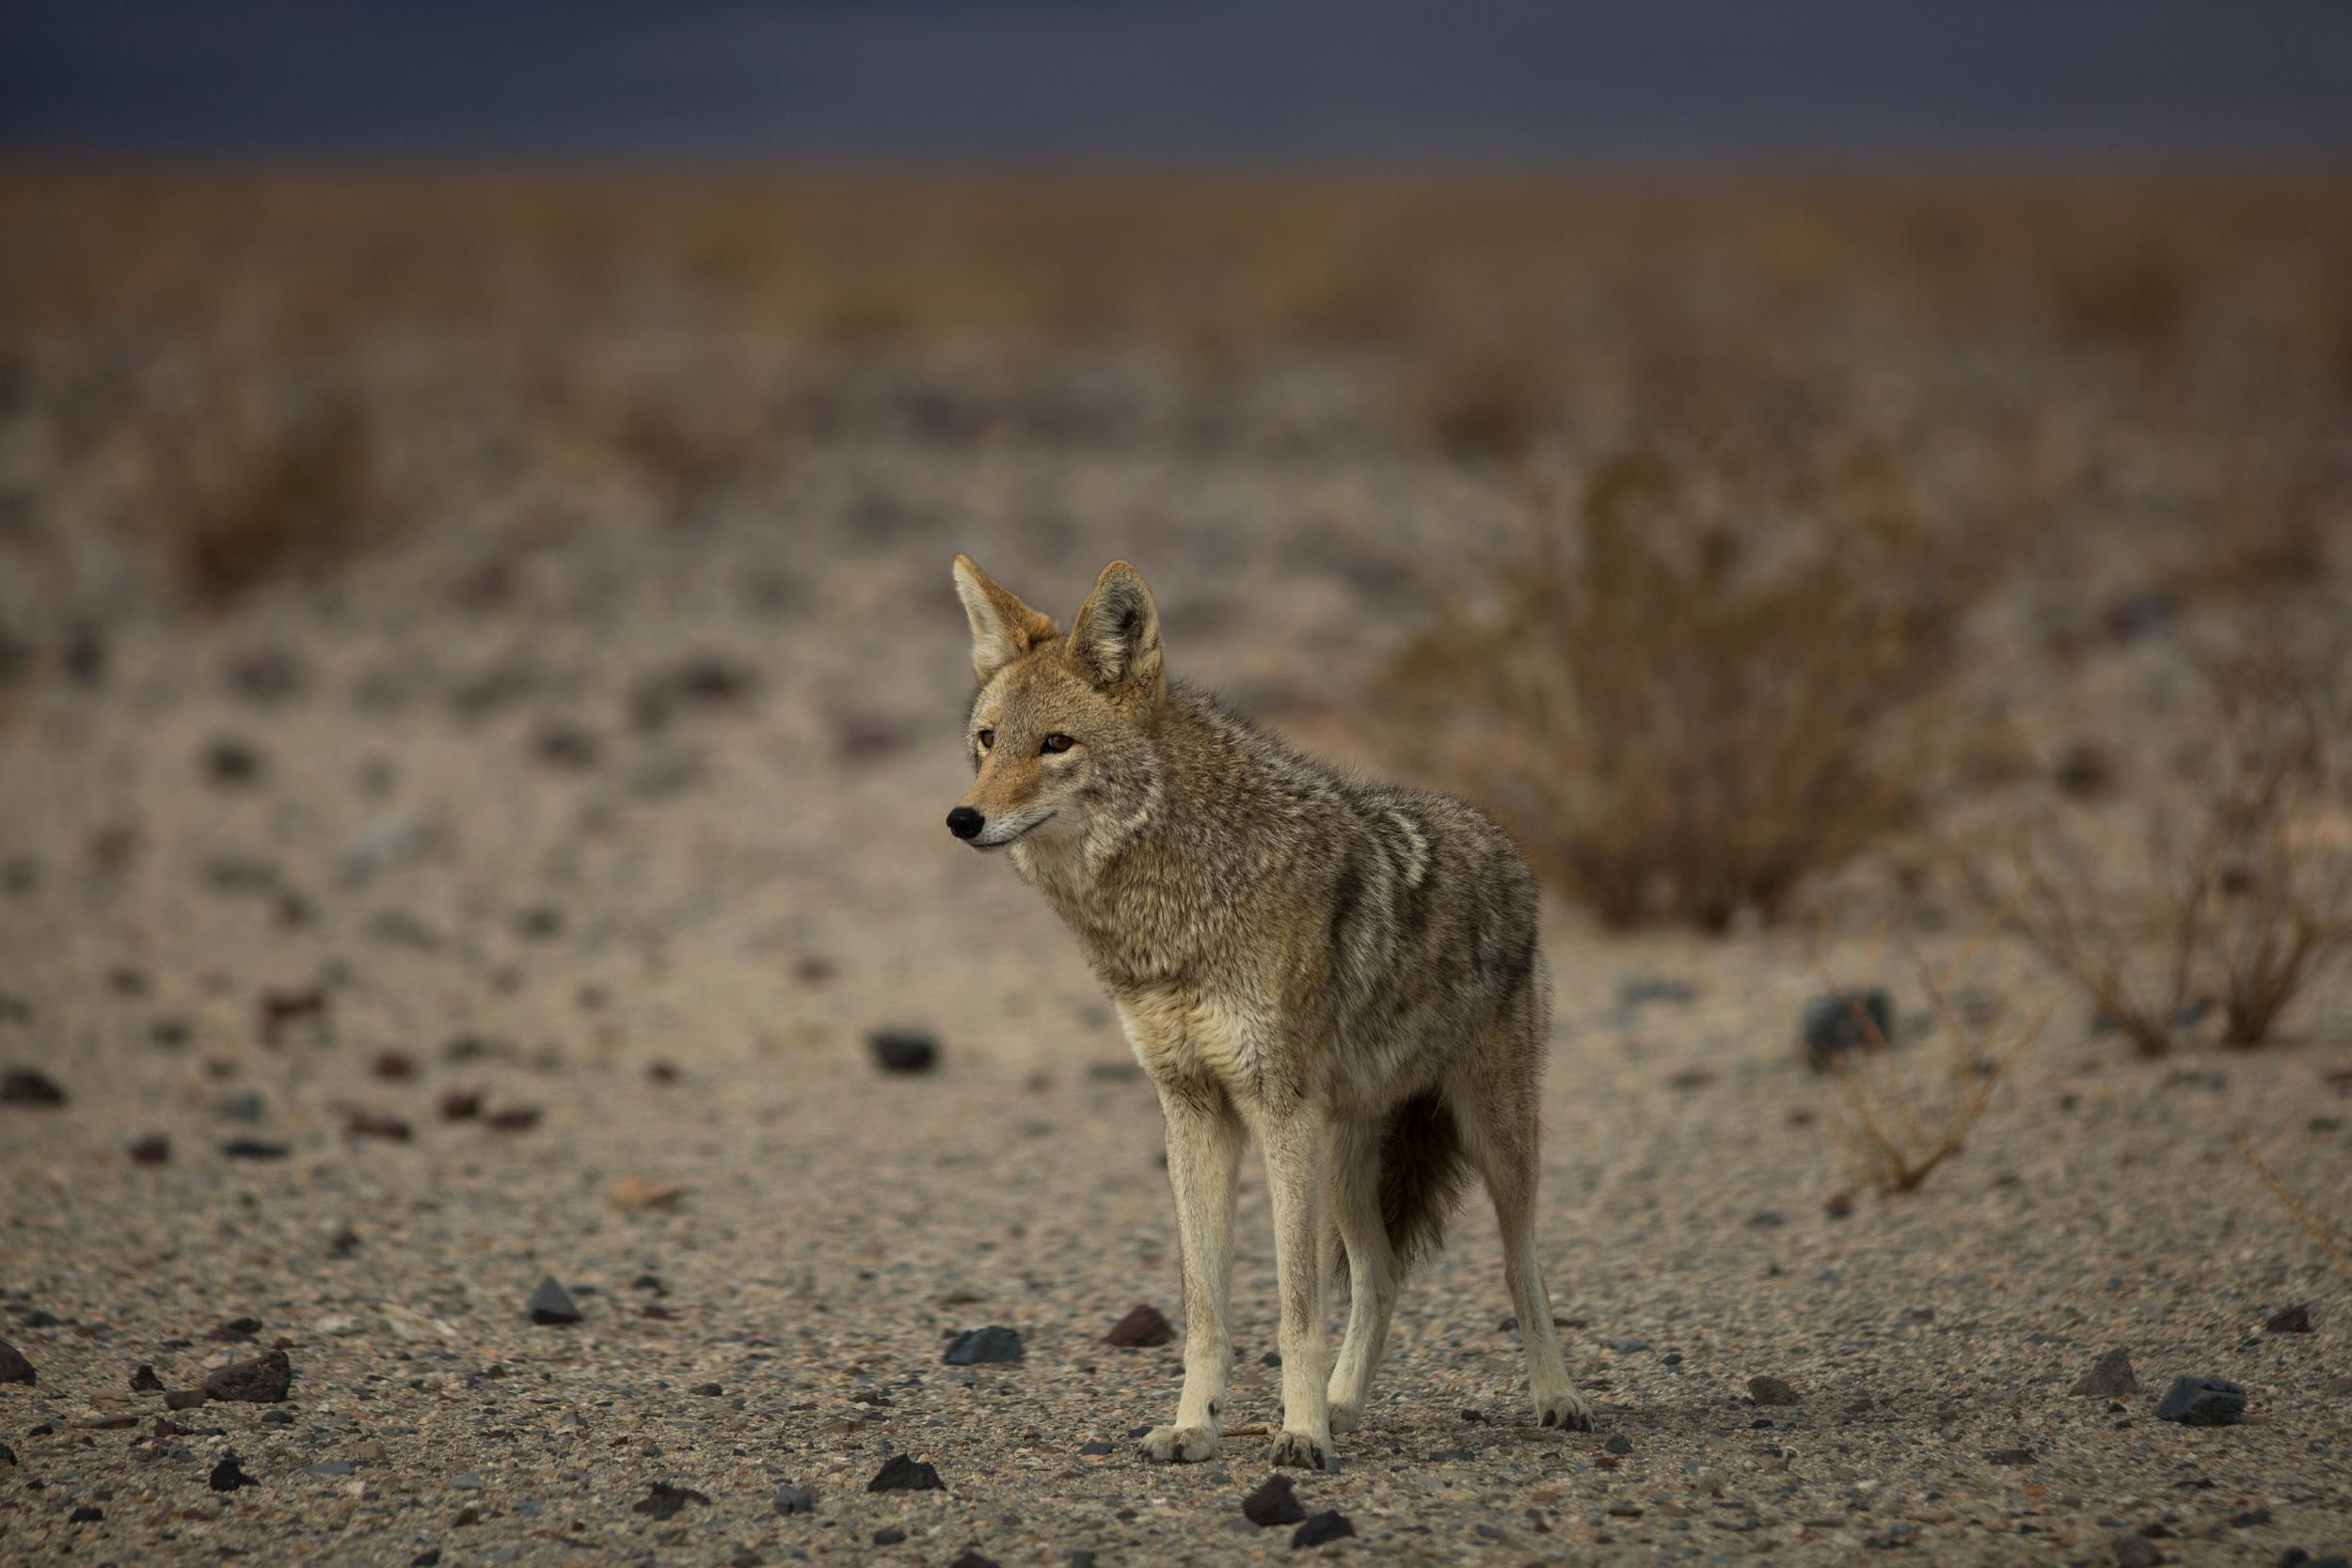 M-44 chemical traps spray a fatal dose of sodium cyanide on unsuspecting animals, including hundreds of coyotes every year